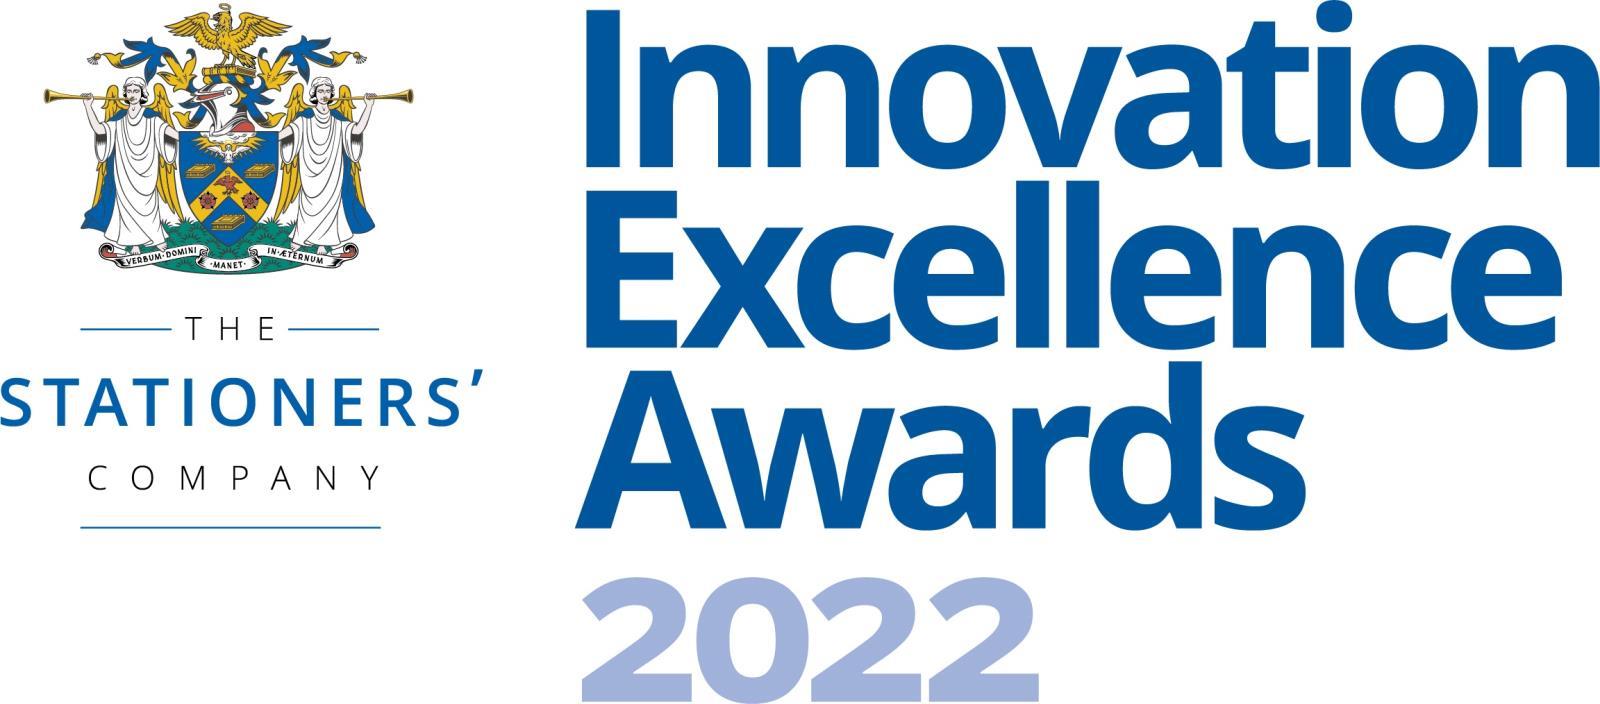 Innovation Excellence Awards Lunch 2022 - 31 October